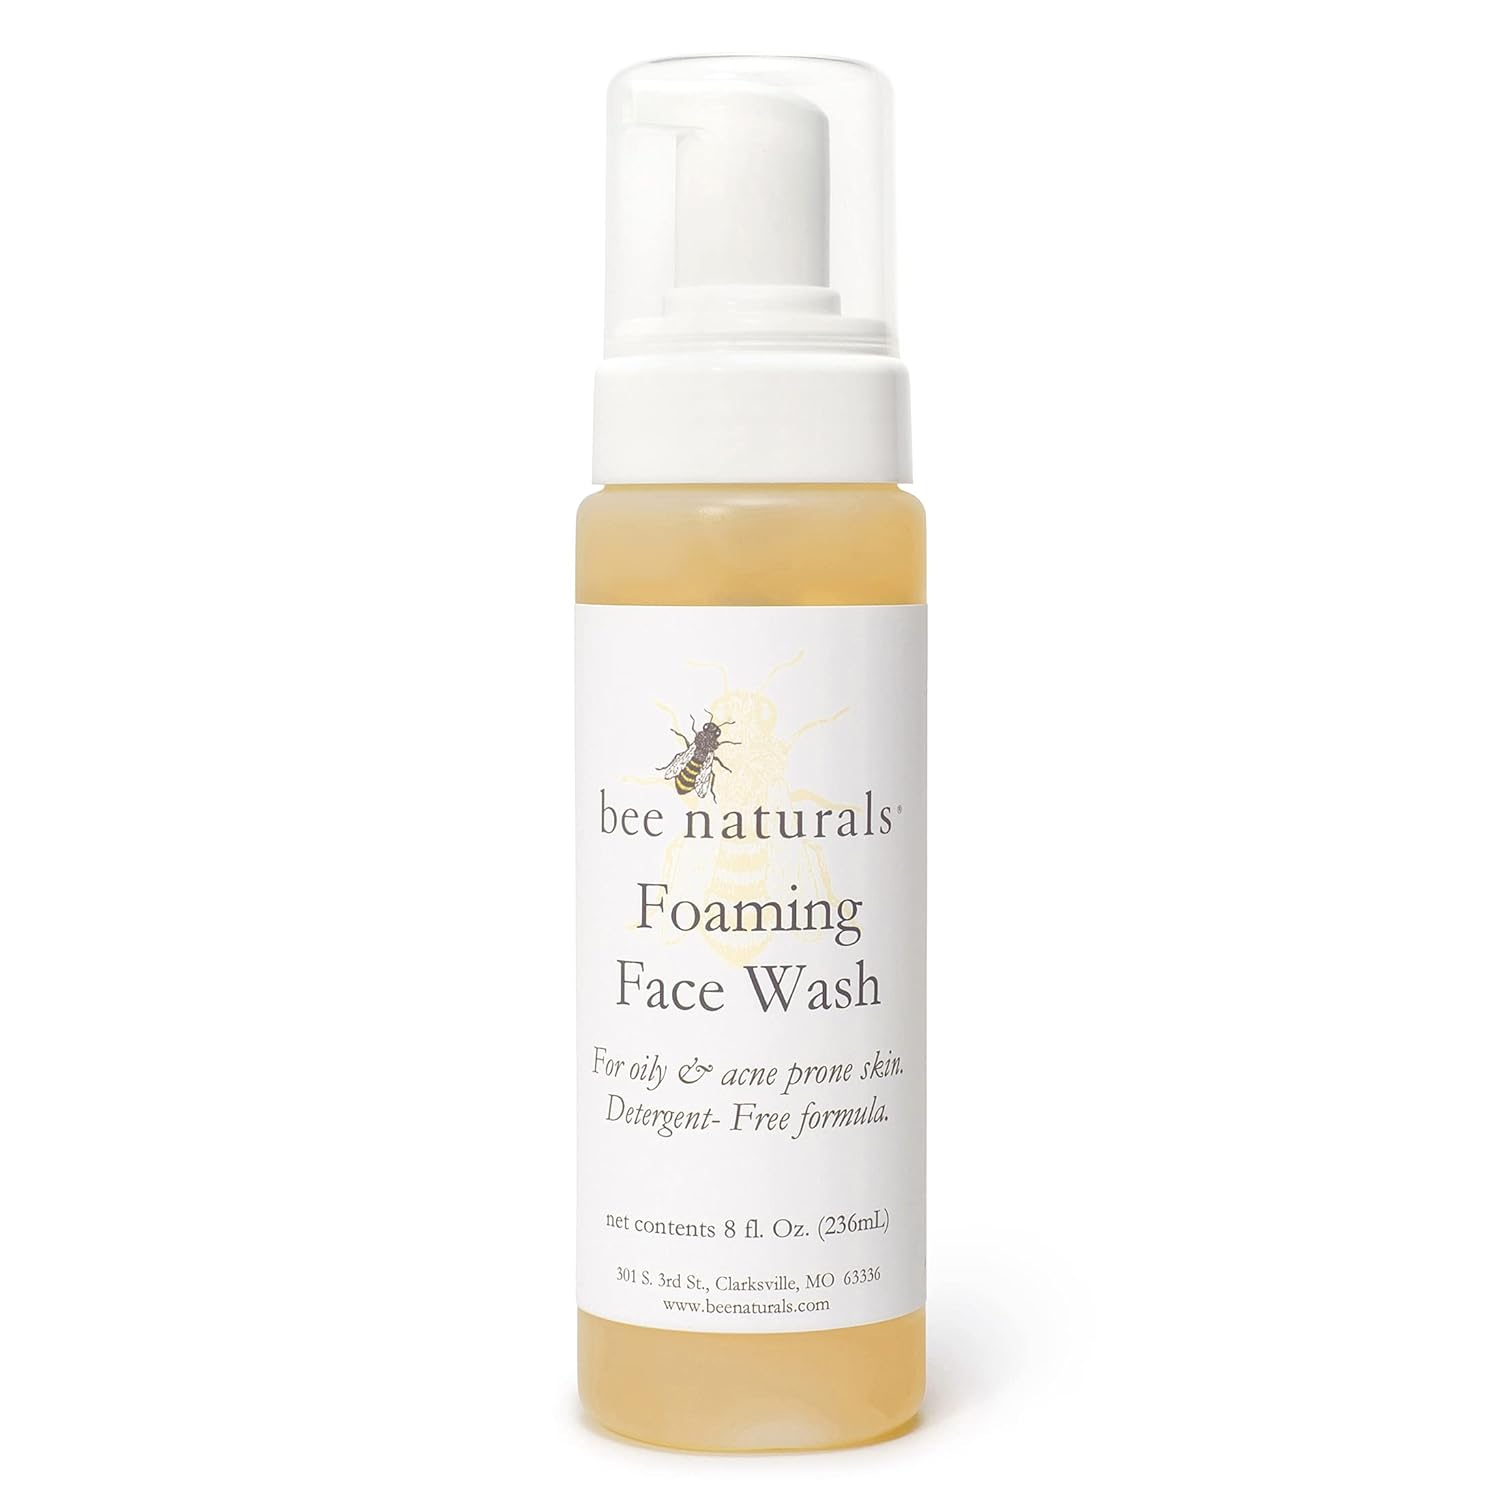 Foaming Face Wash Best For Oily Skin - Bee Naturals